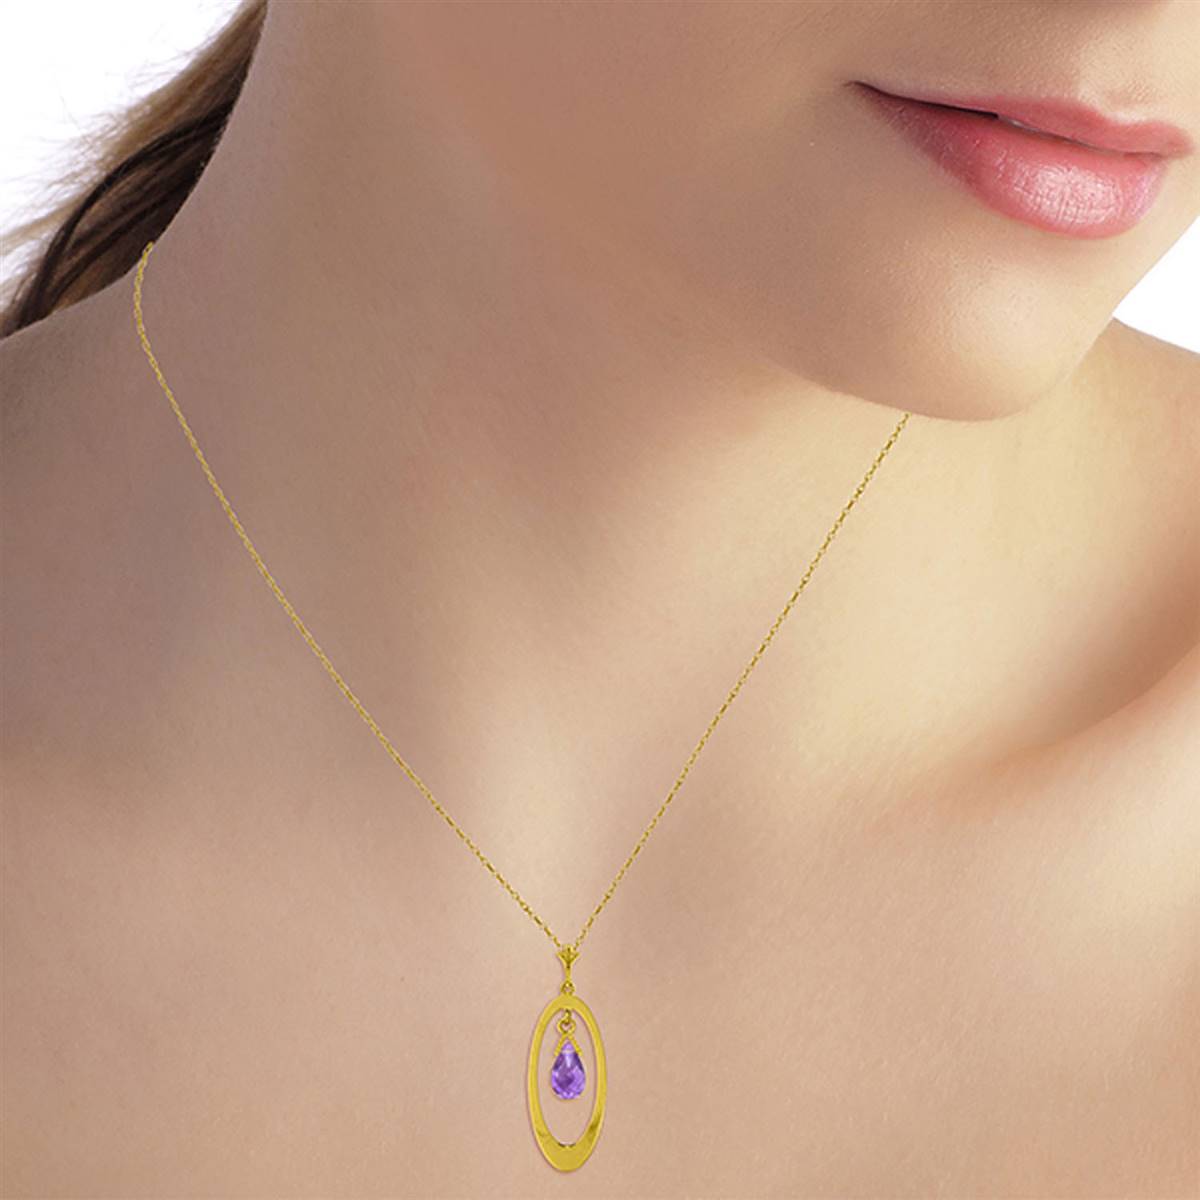 0.7 Carat 14K Solid Yellow Gold Fluent In Love Amethyst Necklace